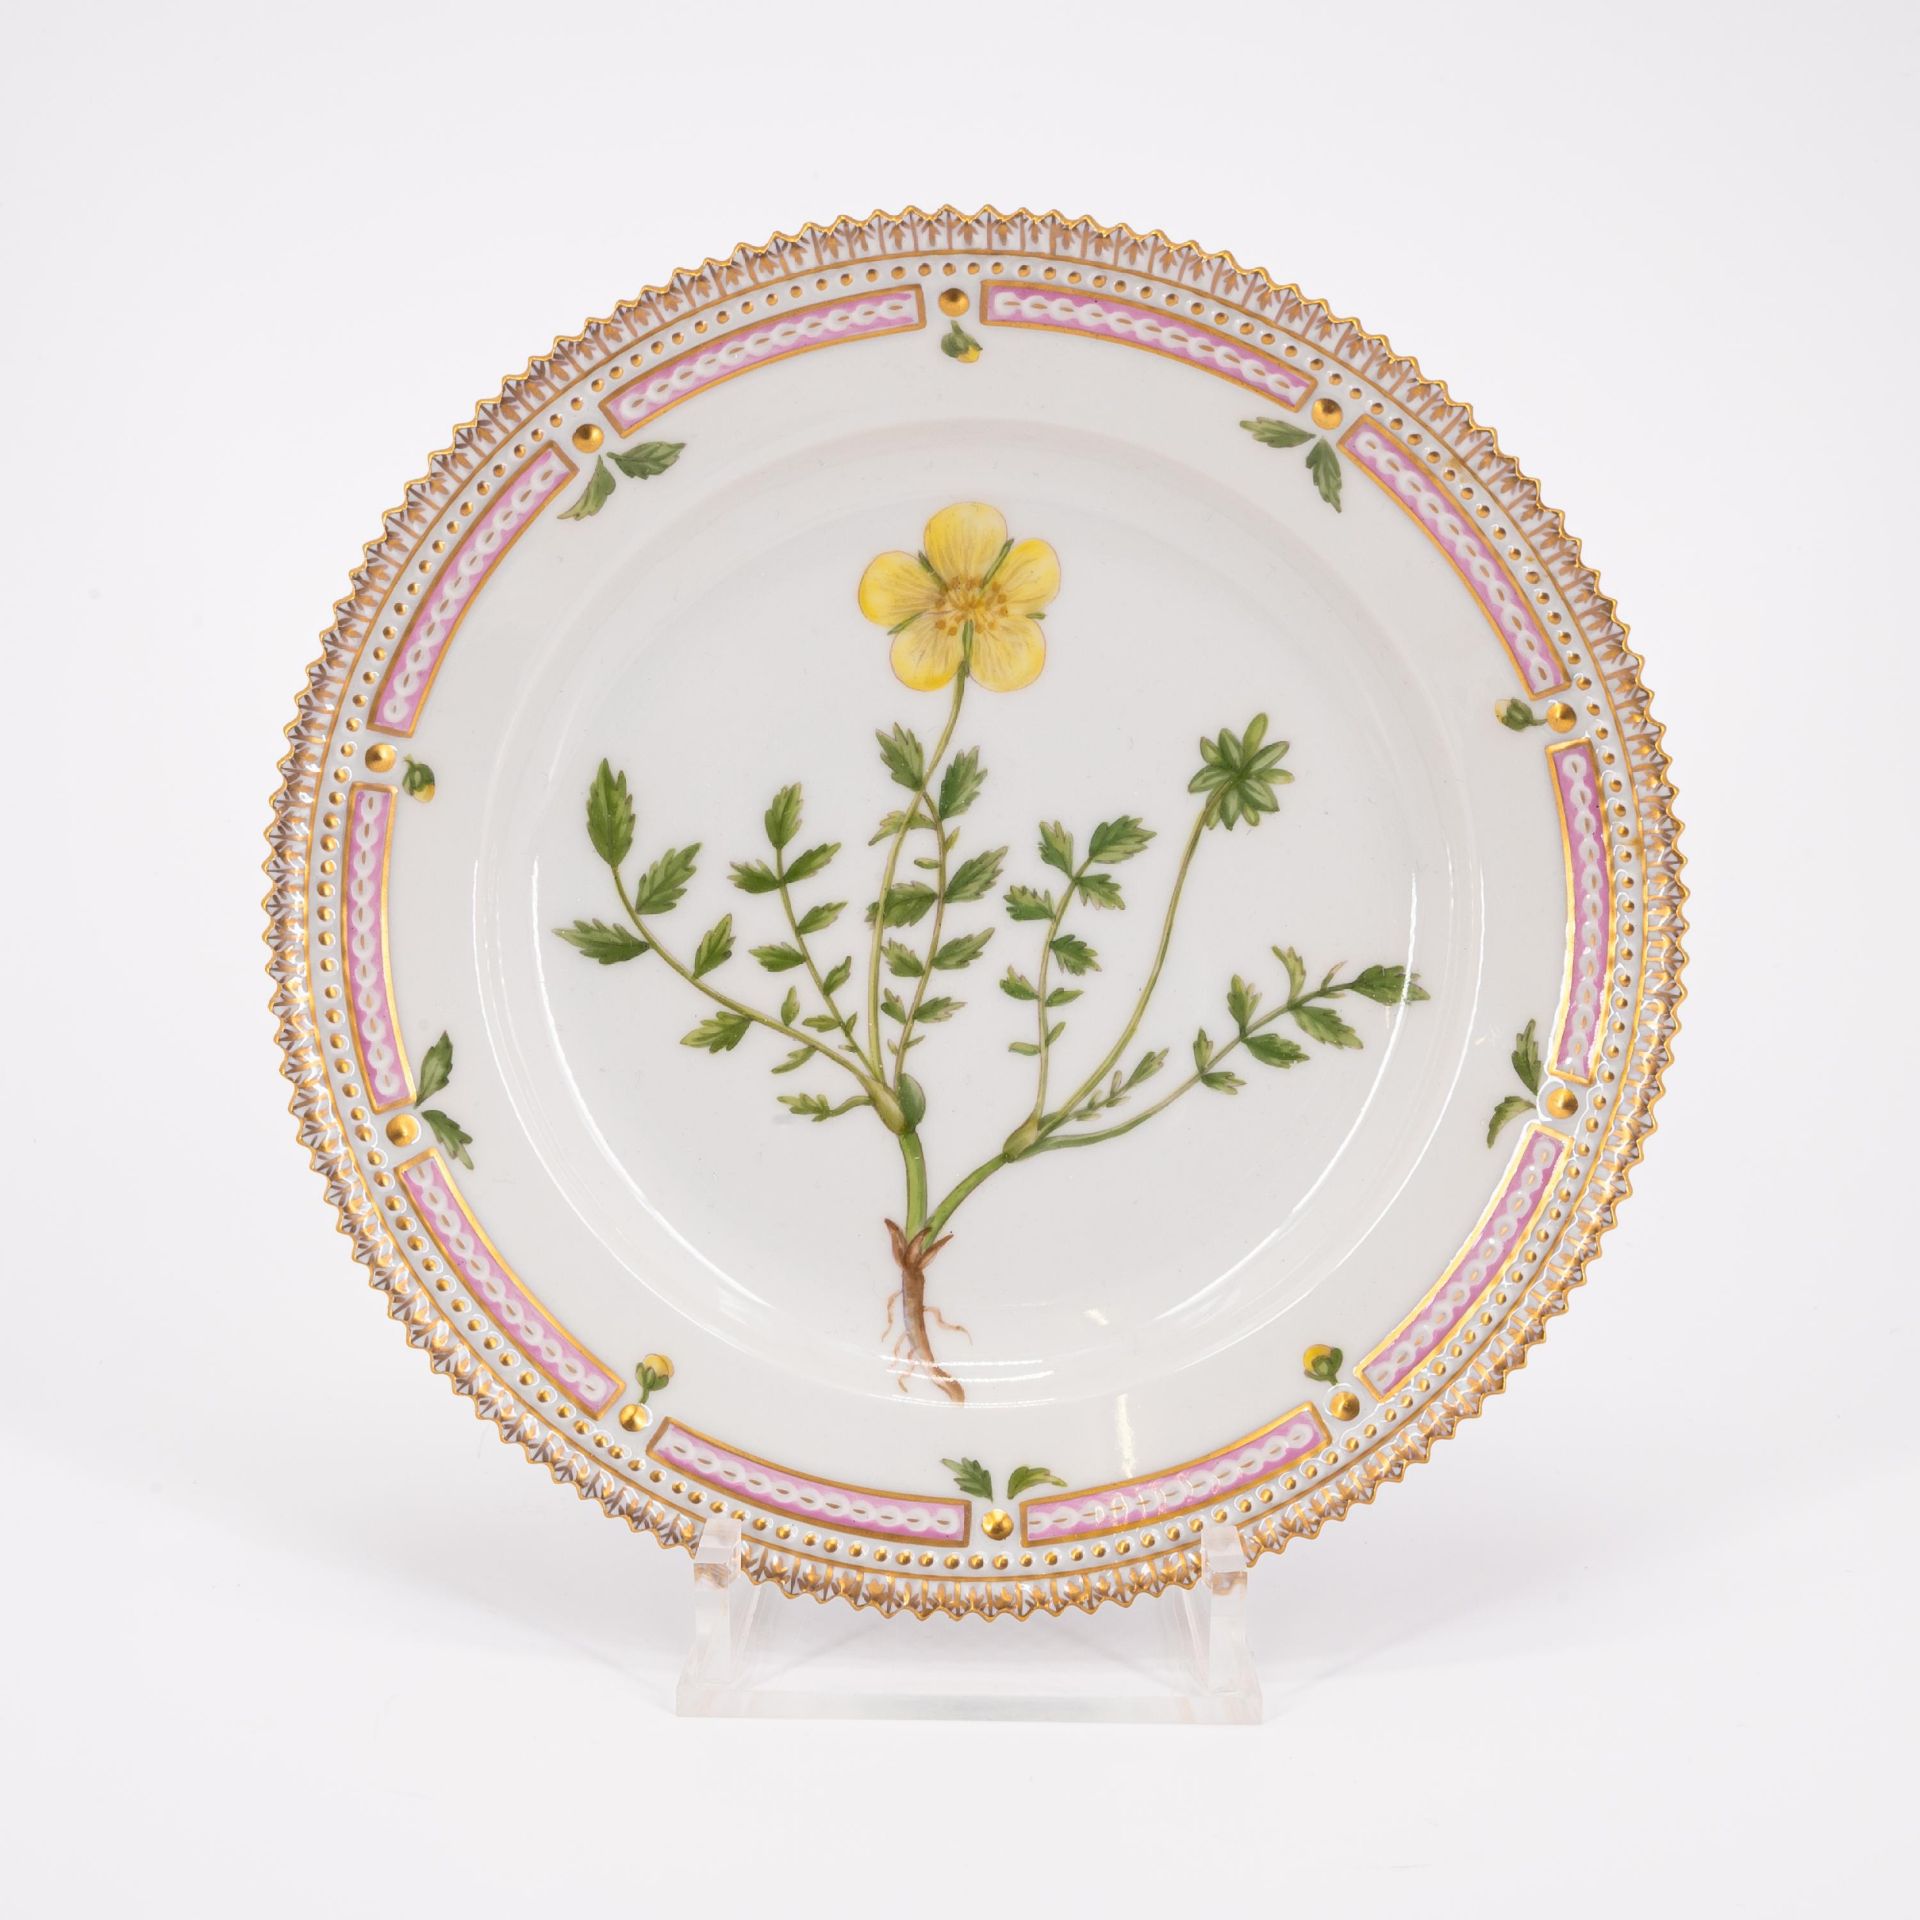 Royal Copenhagen: 95 PIECES FROM A 'FLORA DANICA' DINING SERVICE - Image 20 of 26